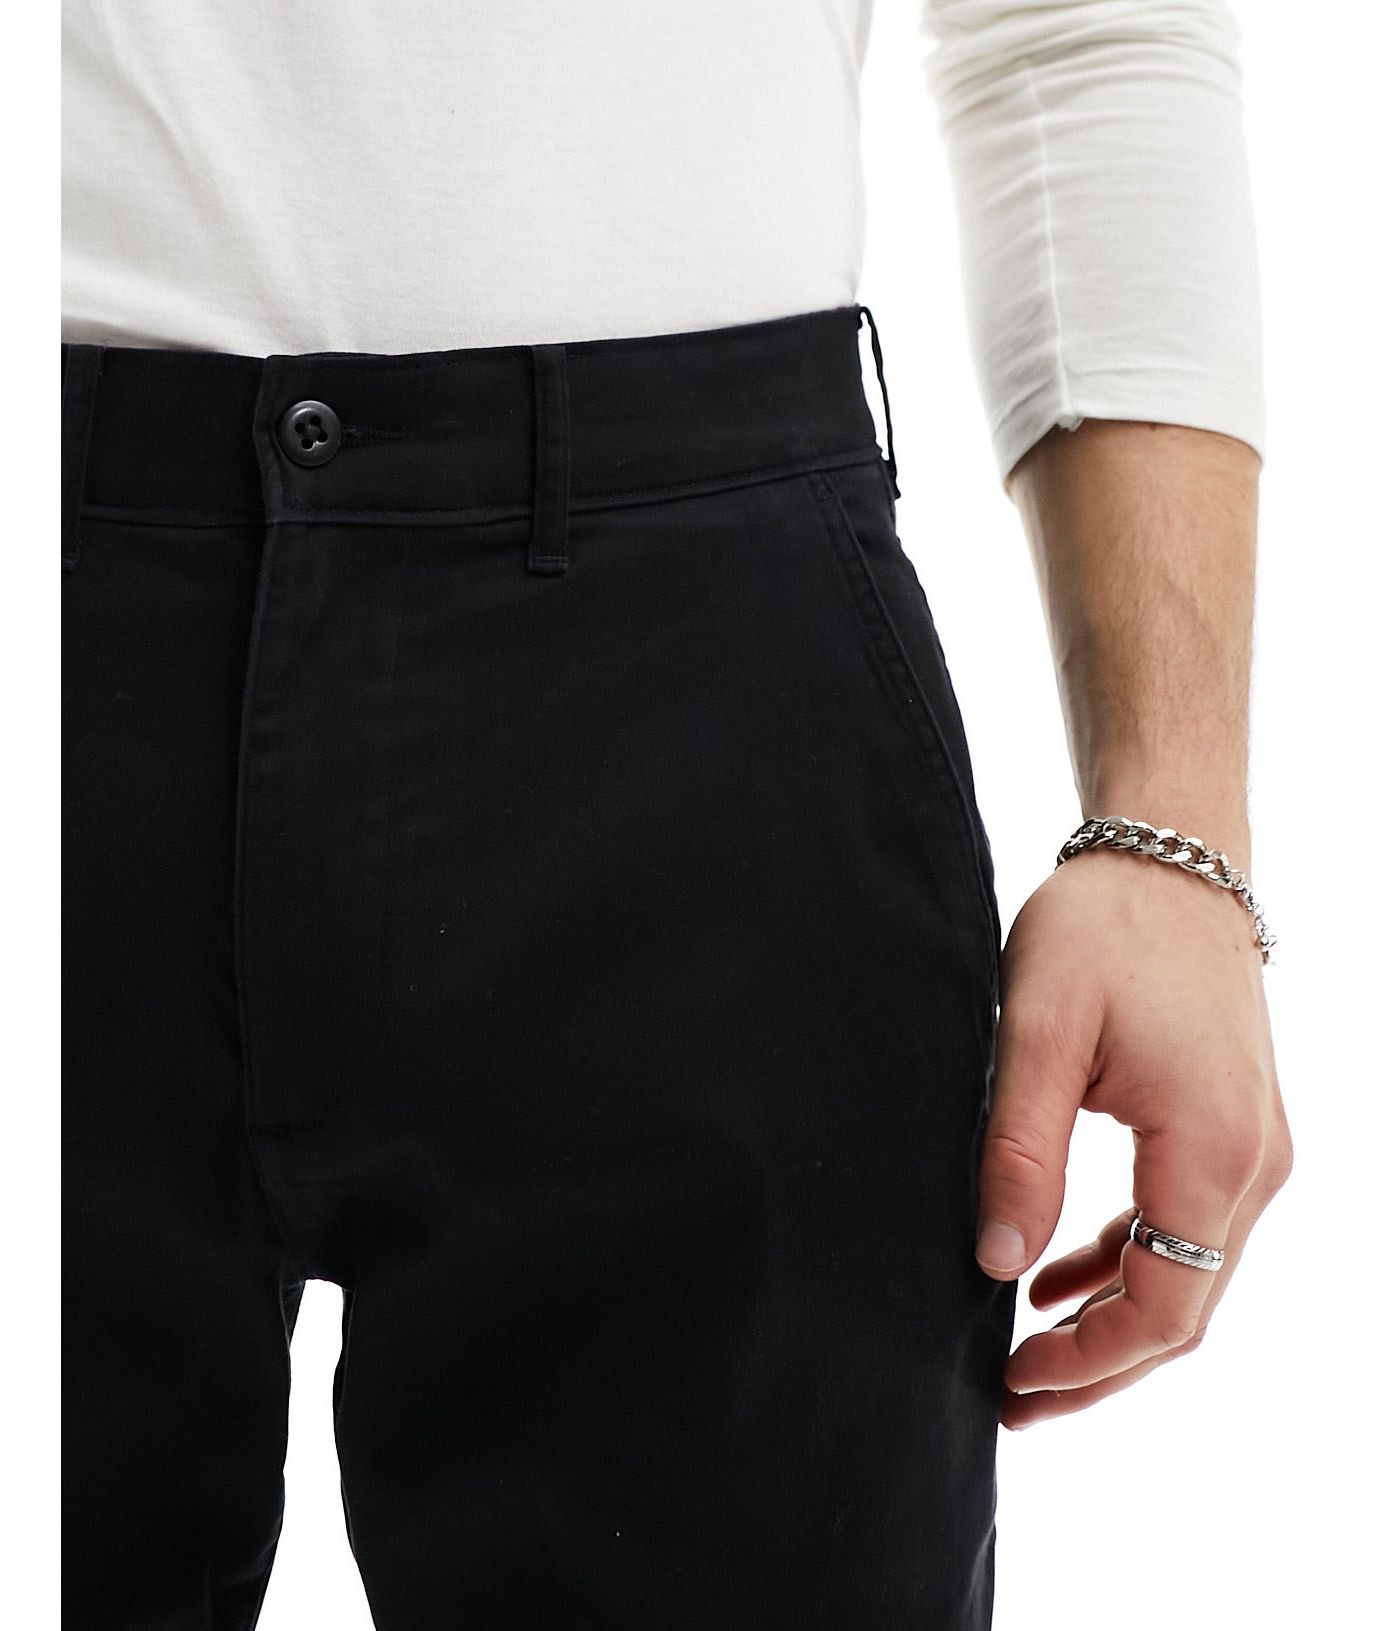 Abercrombie & Fitch athletic skinny fit modern chino trousers in black